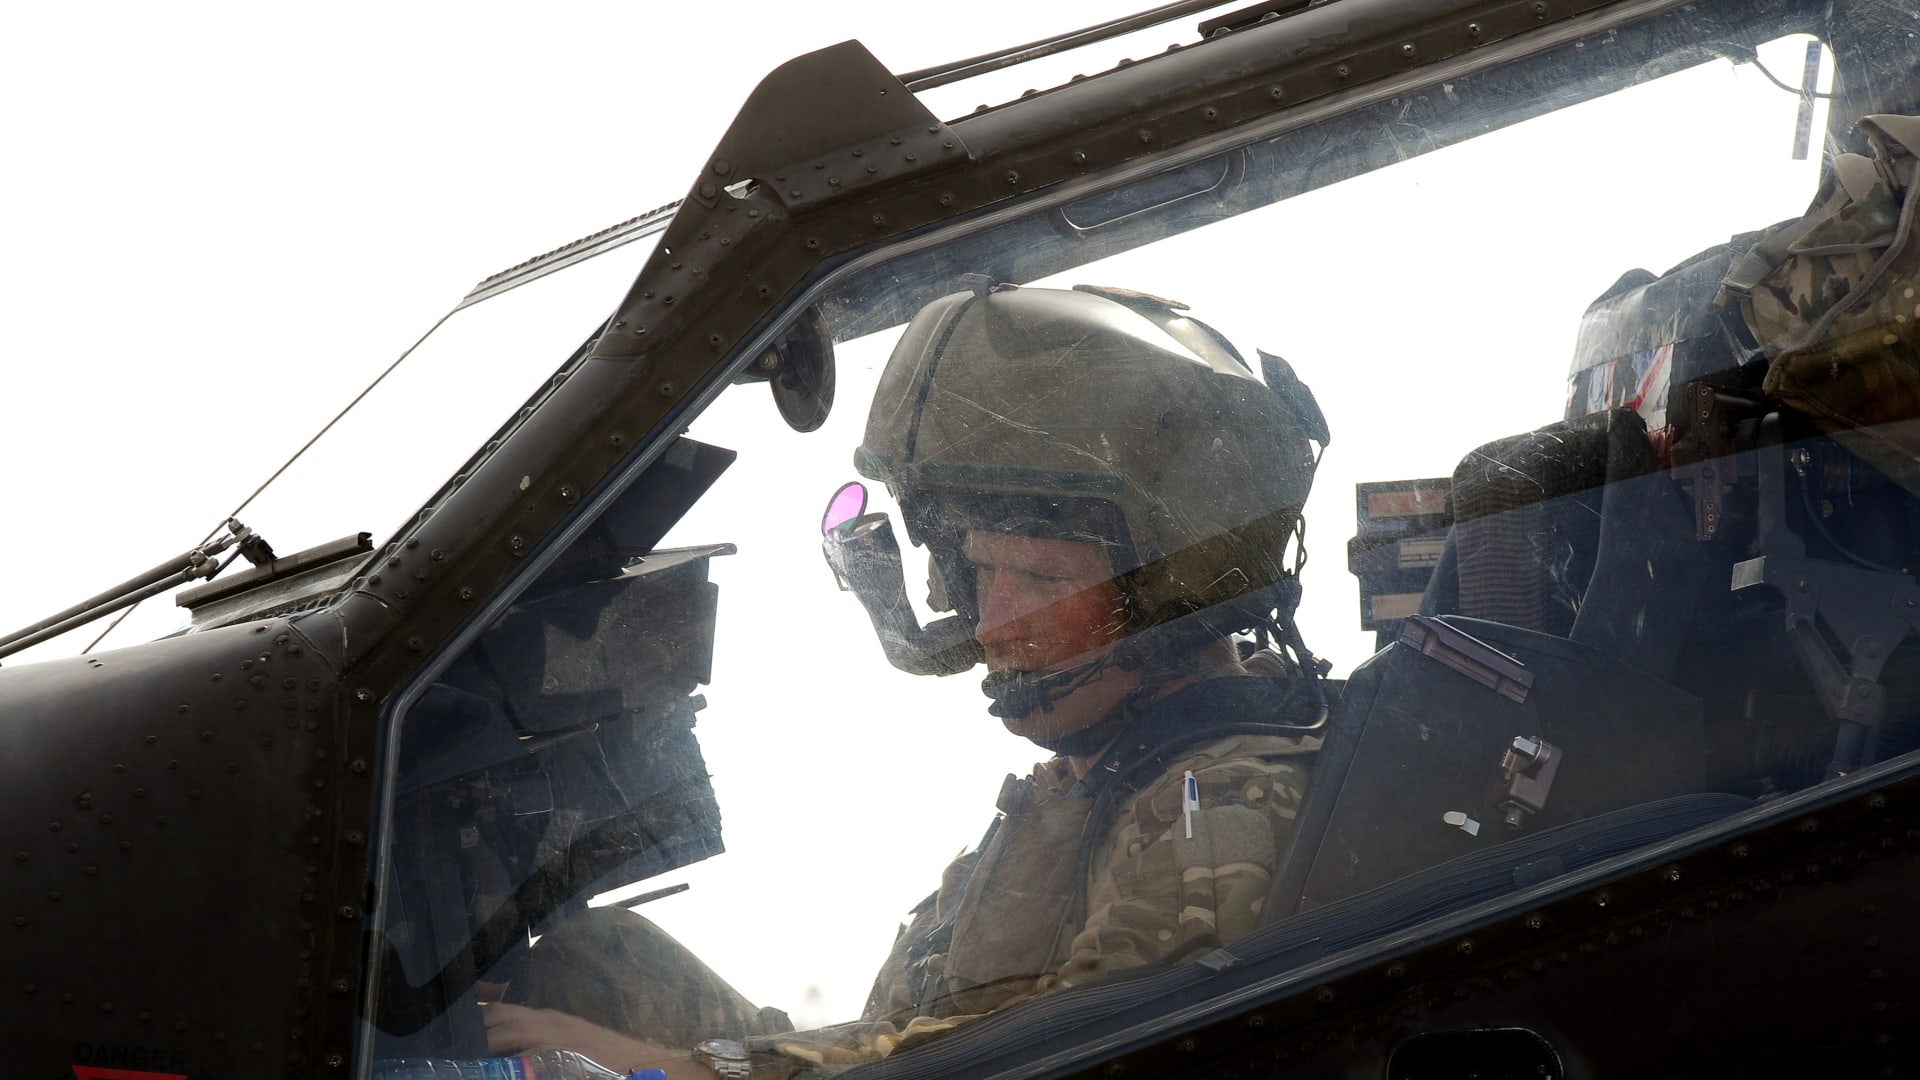 Prince Harry sits in the front cockpit of an Apache helicopter at the British controlled flight-line in Camp Bastion on October 31, 2012 in Afghanistan. Prince Harry served as an Apache Helicopter Pilot/Gunner with 662 Sqd Army Air Corps, from September 2012 for four months until January 2013.